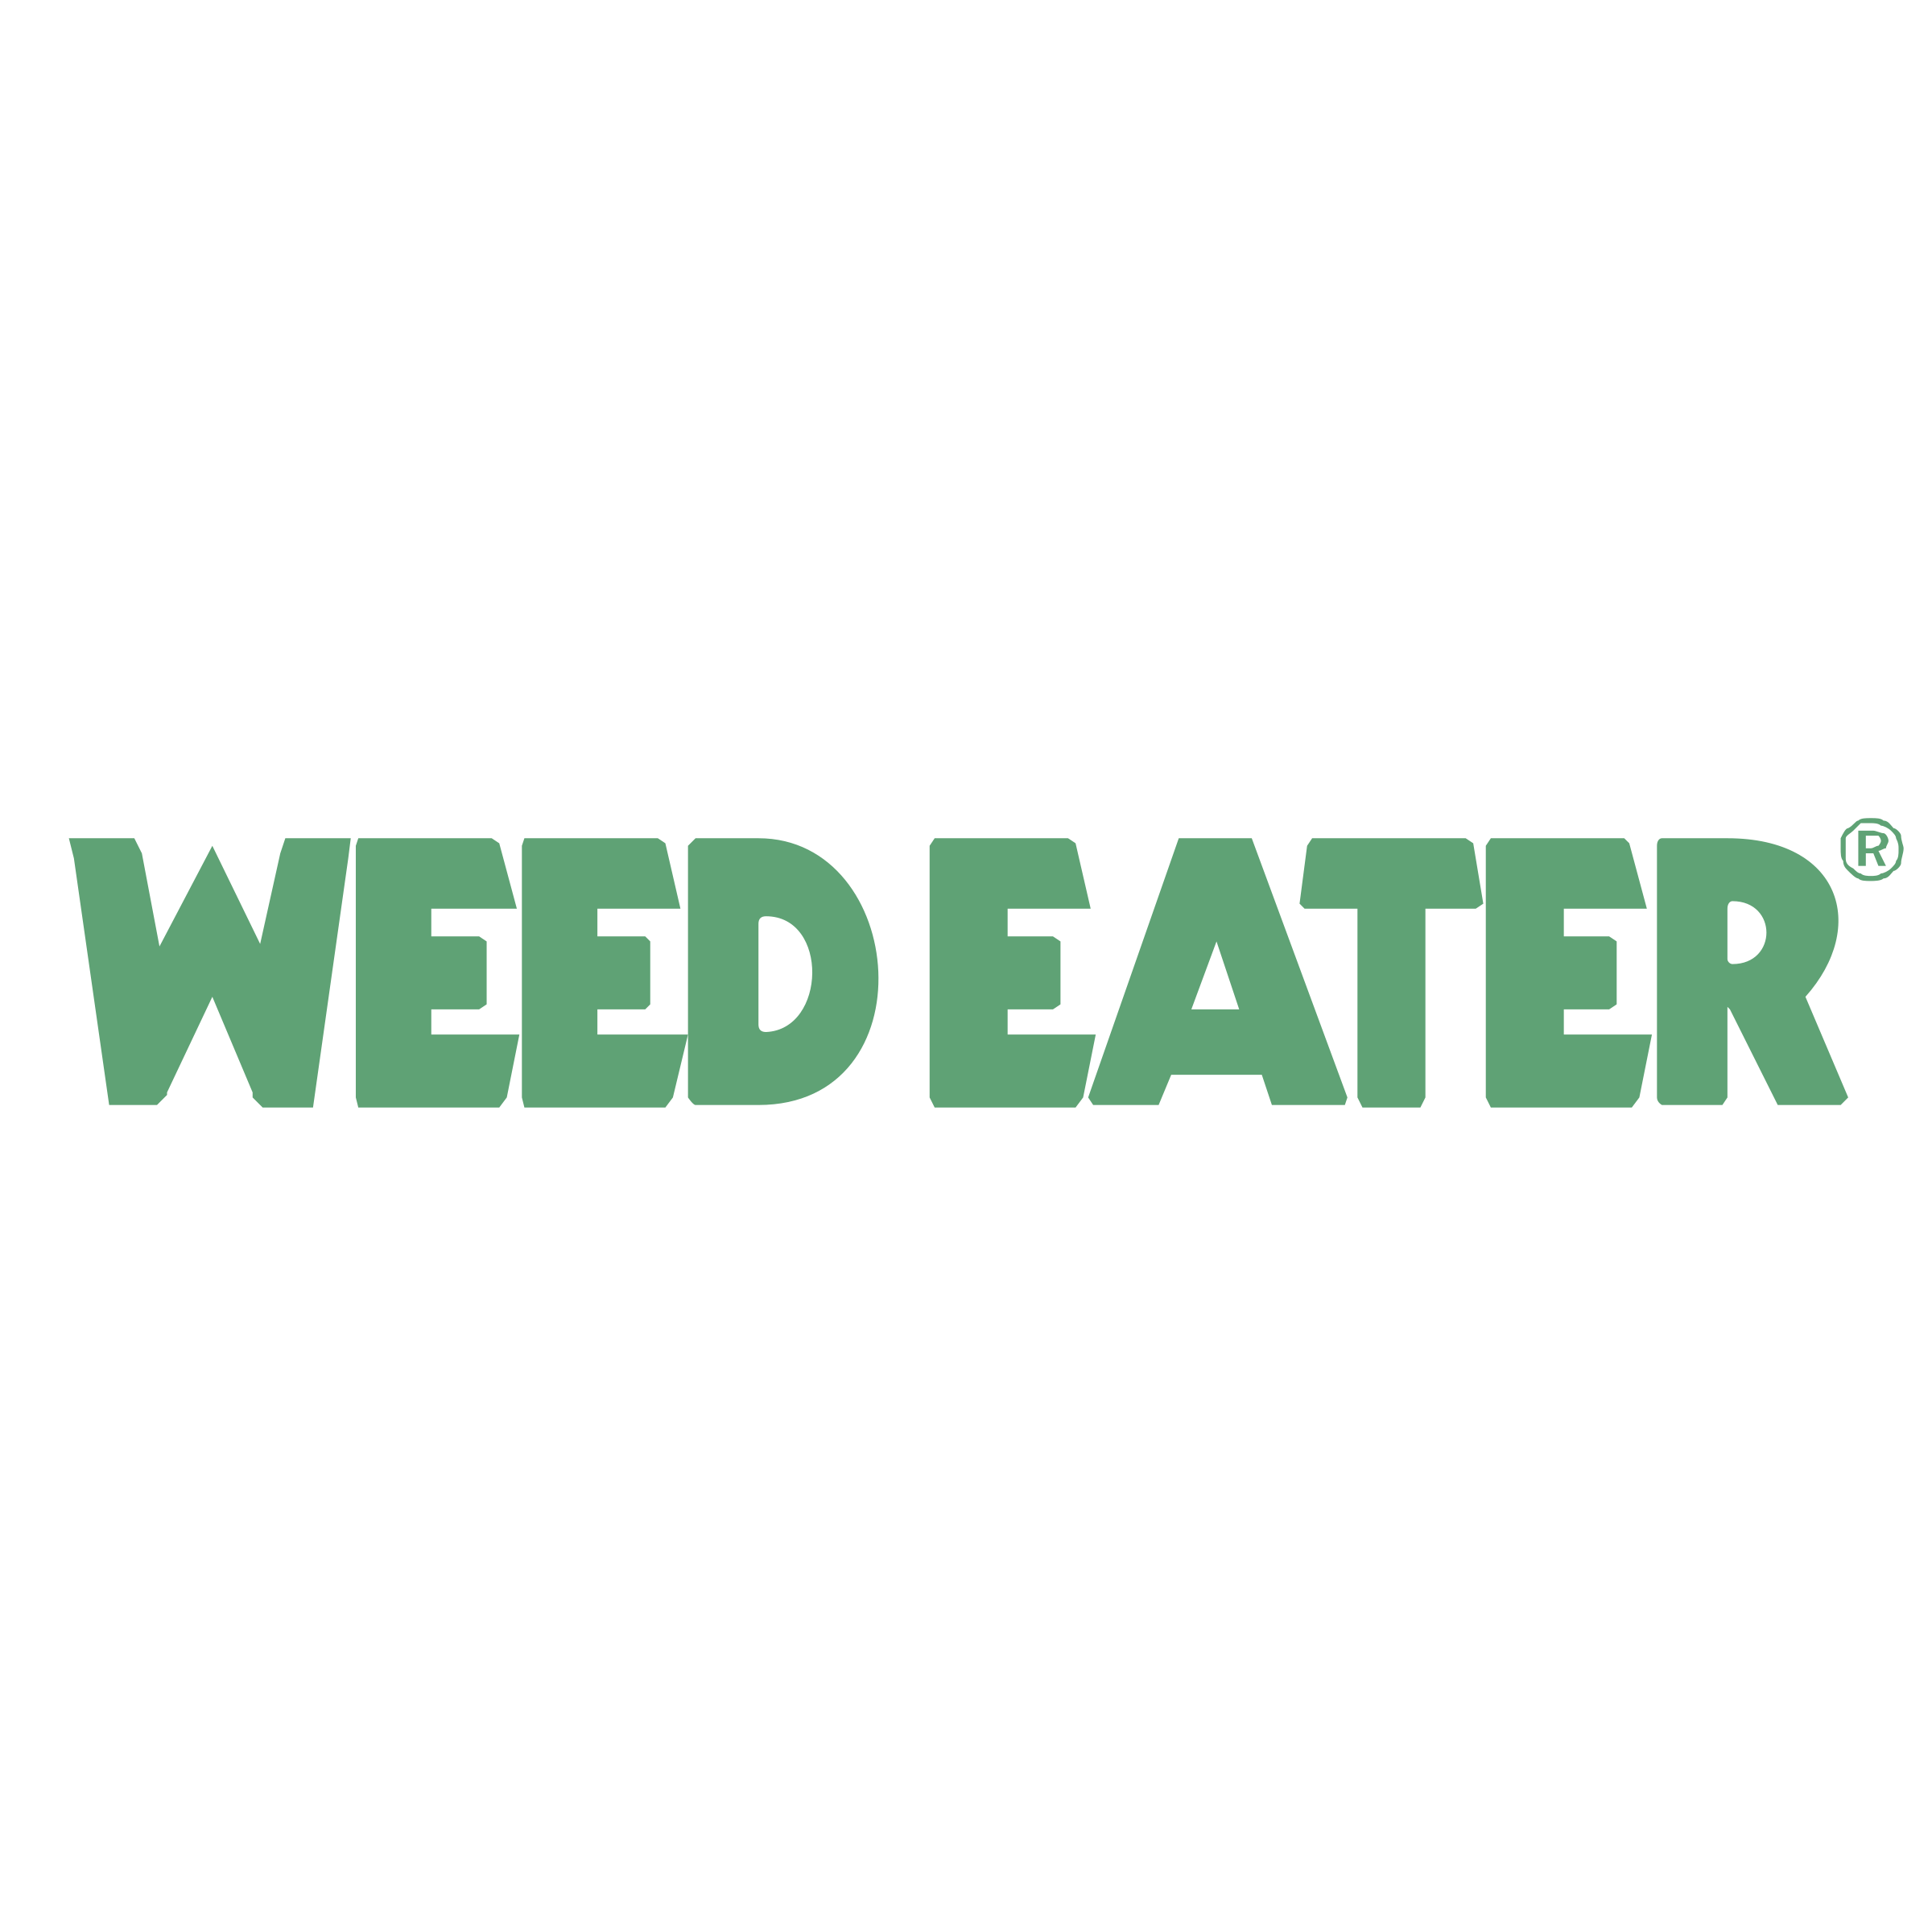 weed eater